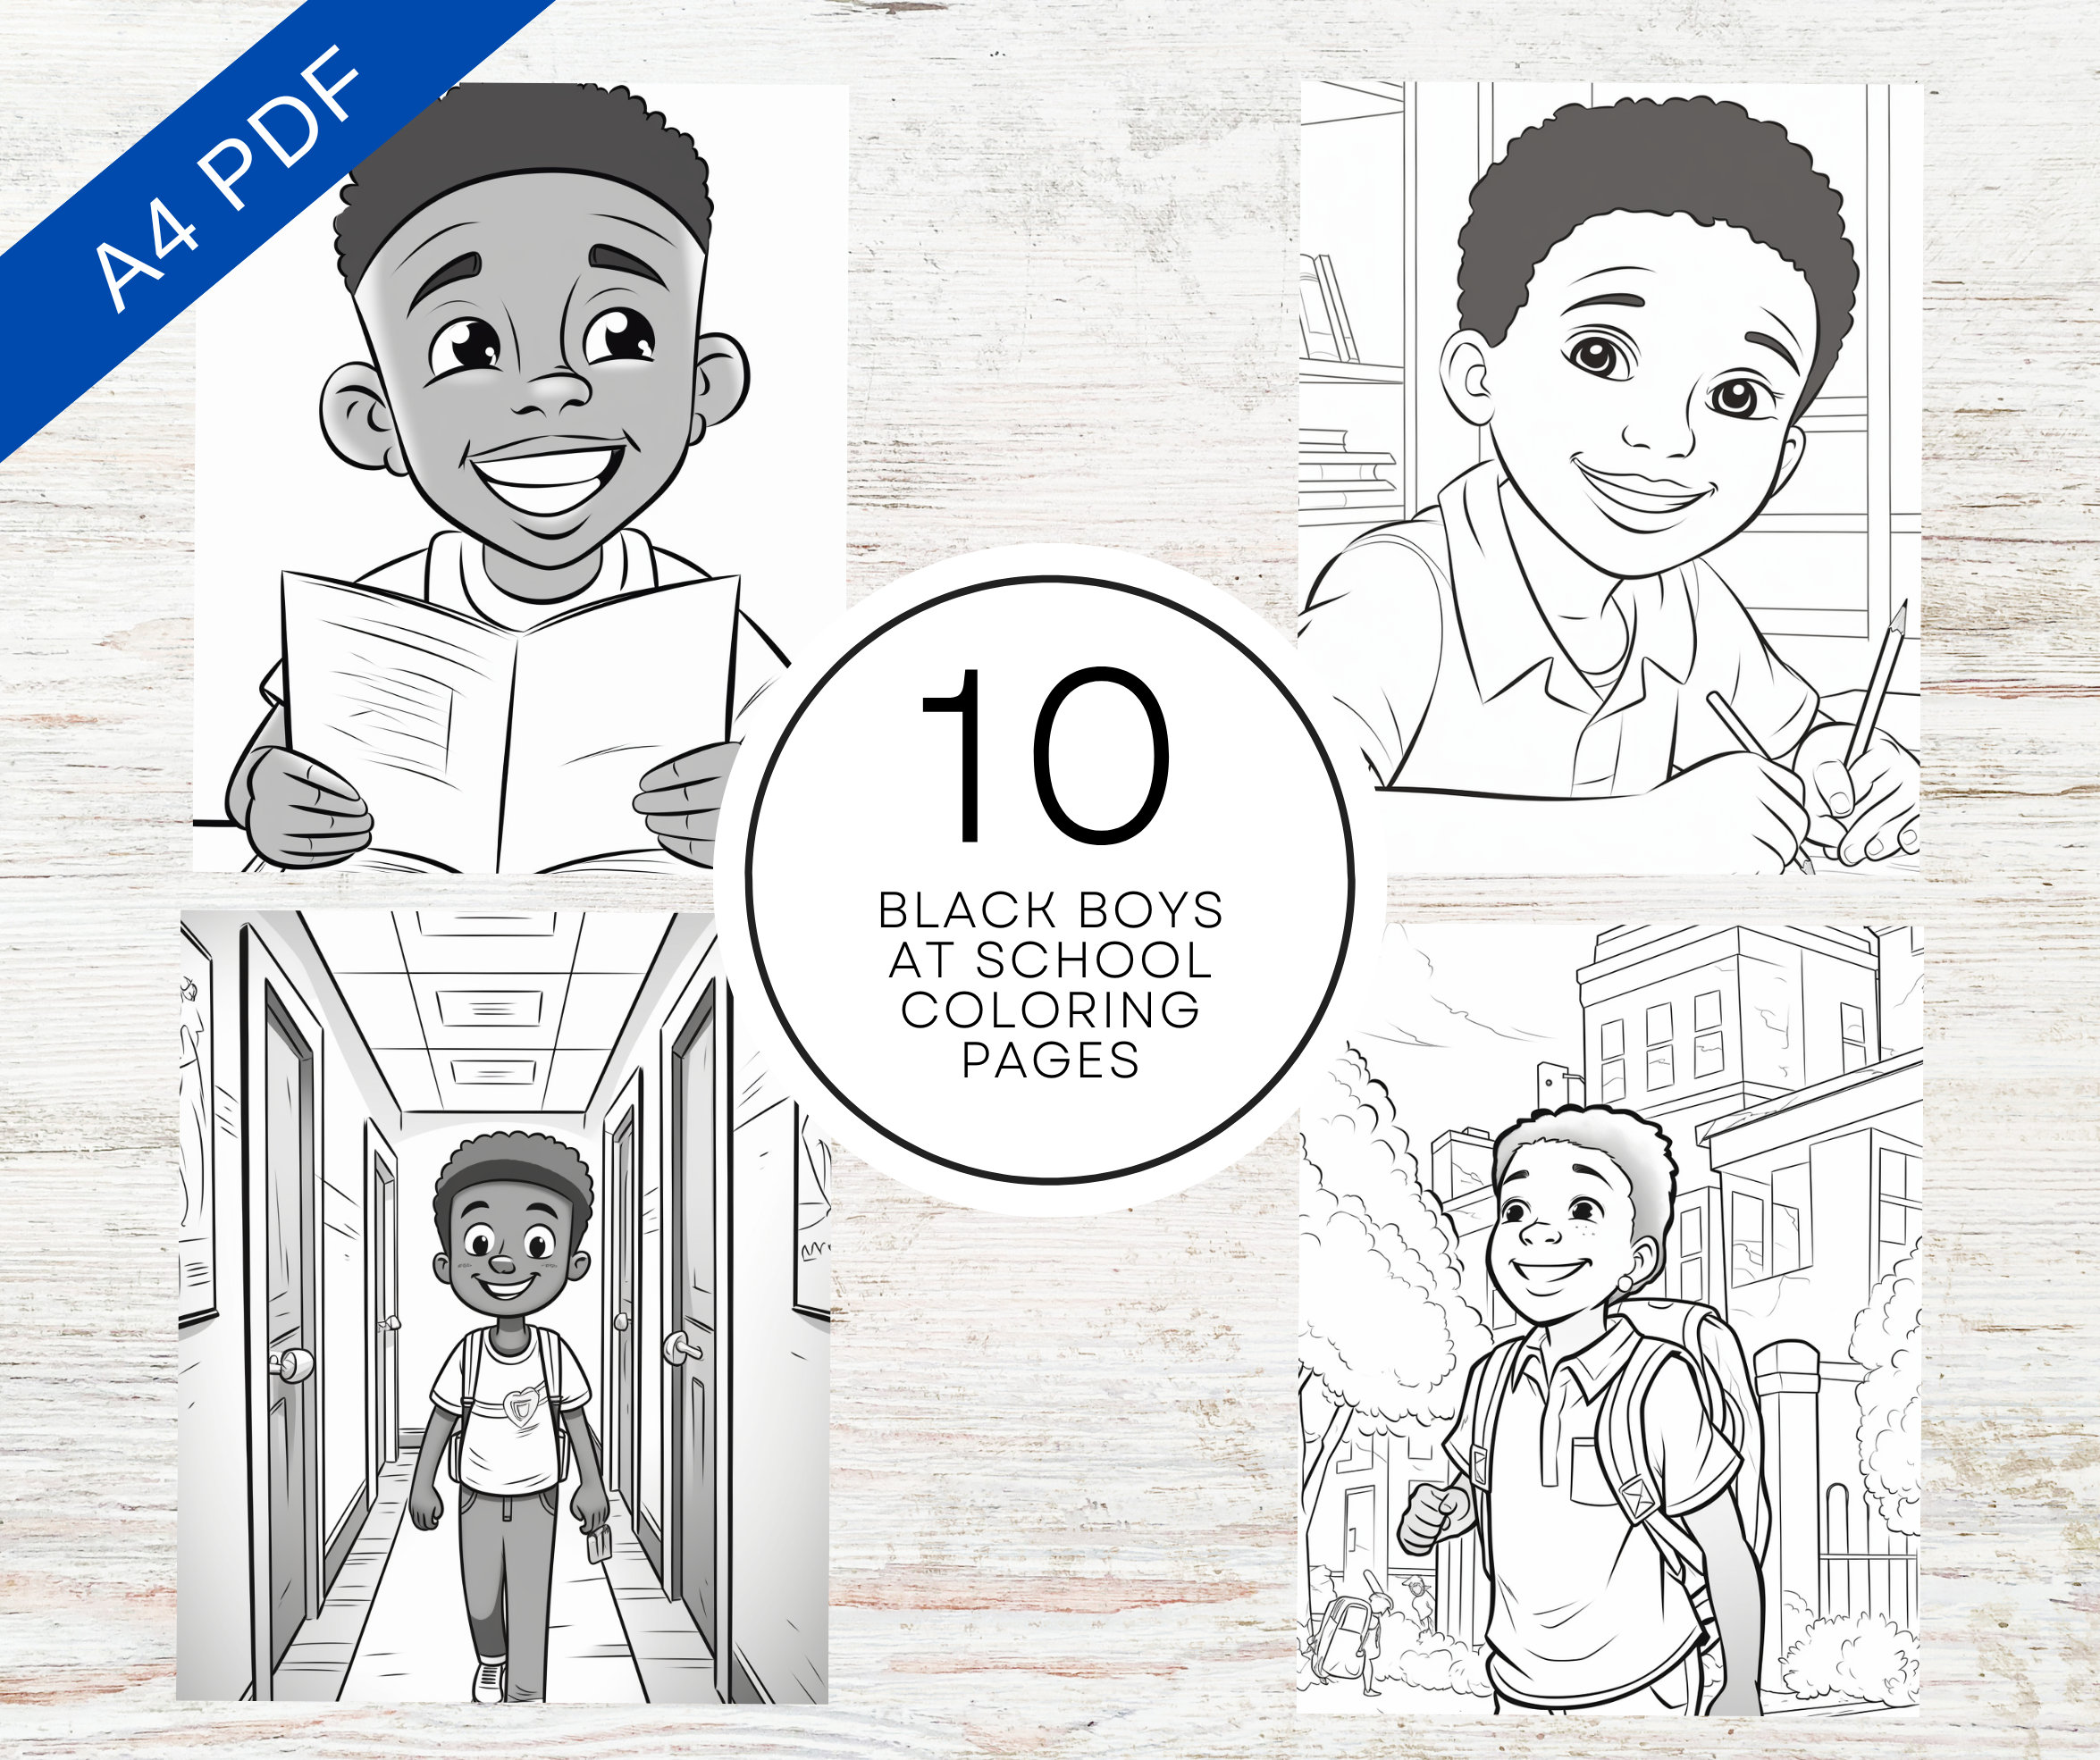 Black boys at school coloring pages printable pdf a cute kids coloring pages for stress relief inclusive diverse